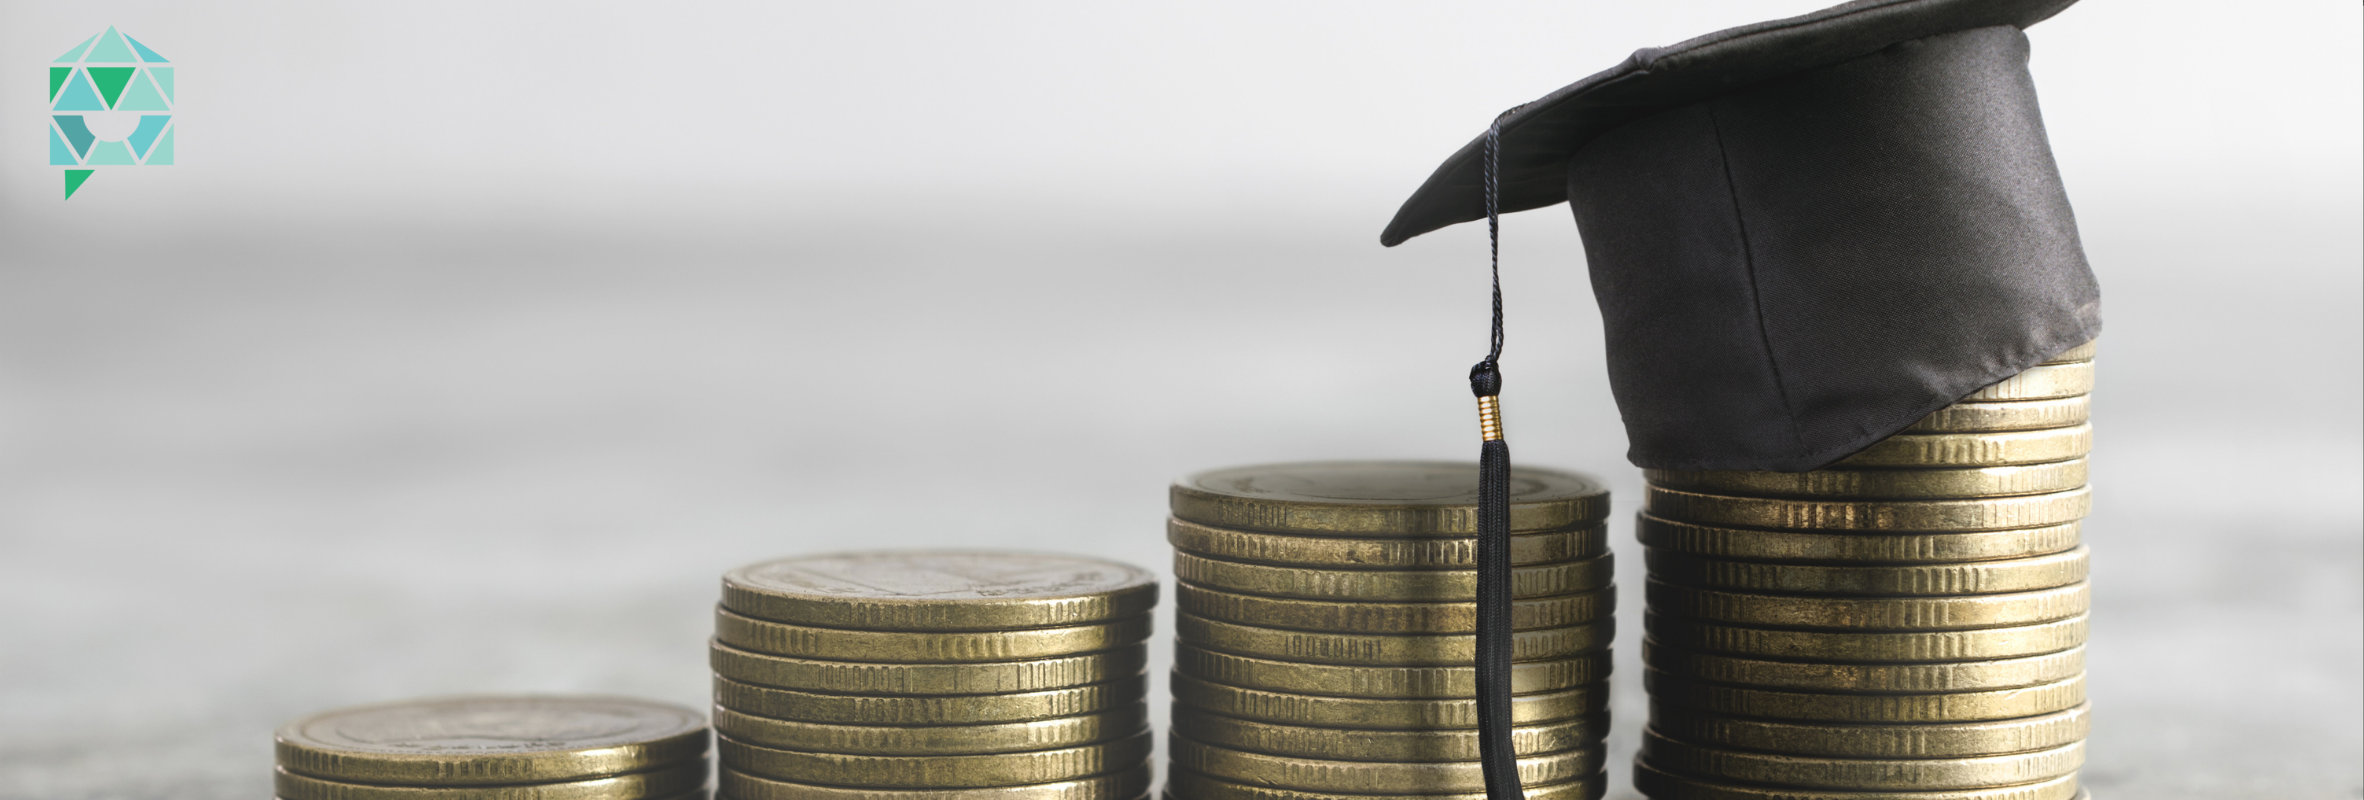 Four stacks of coins are arranged in ascending order of height, from left to right. The leftmost stack has the fewest coins, and the rightmost stack has the most coins. On top of the rightmost stack, there is a graduation cap with a tassel.